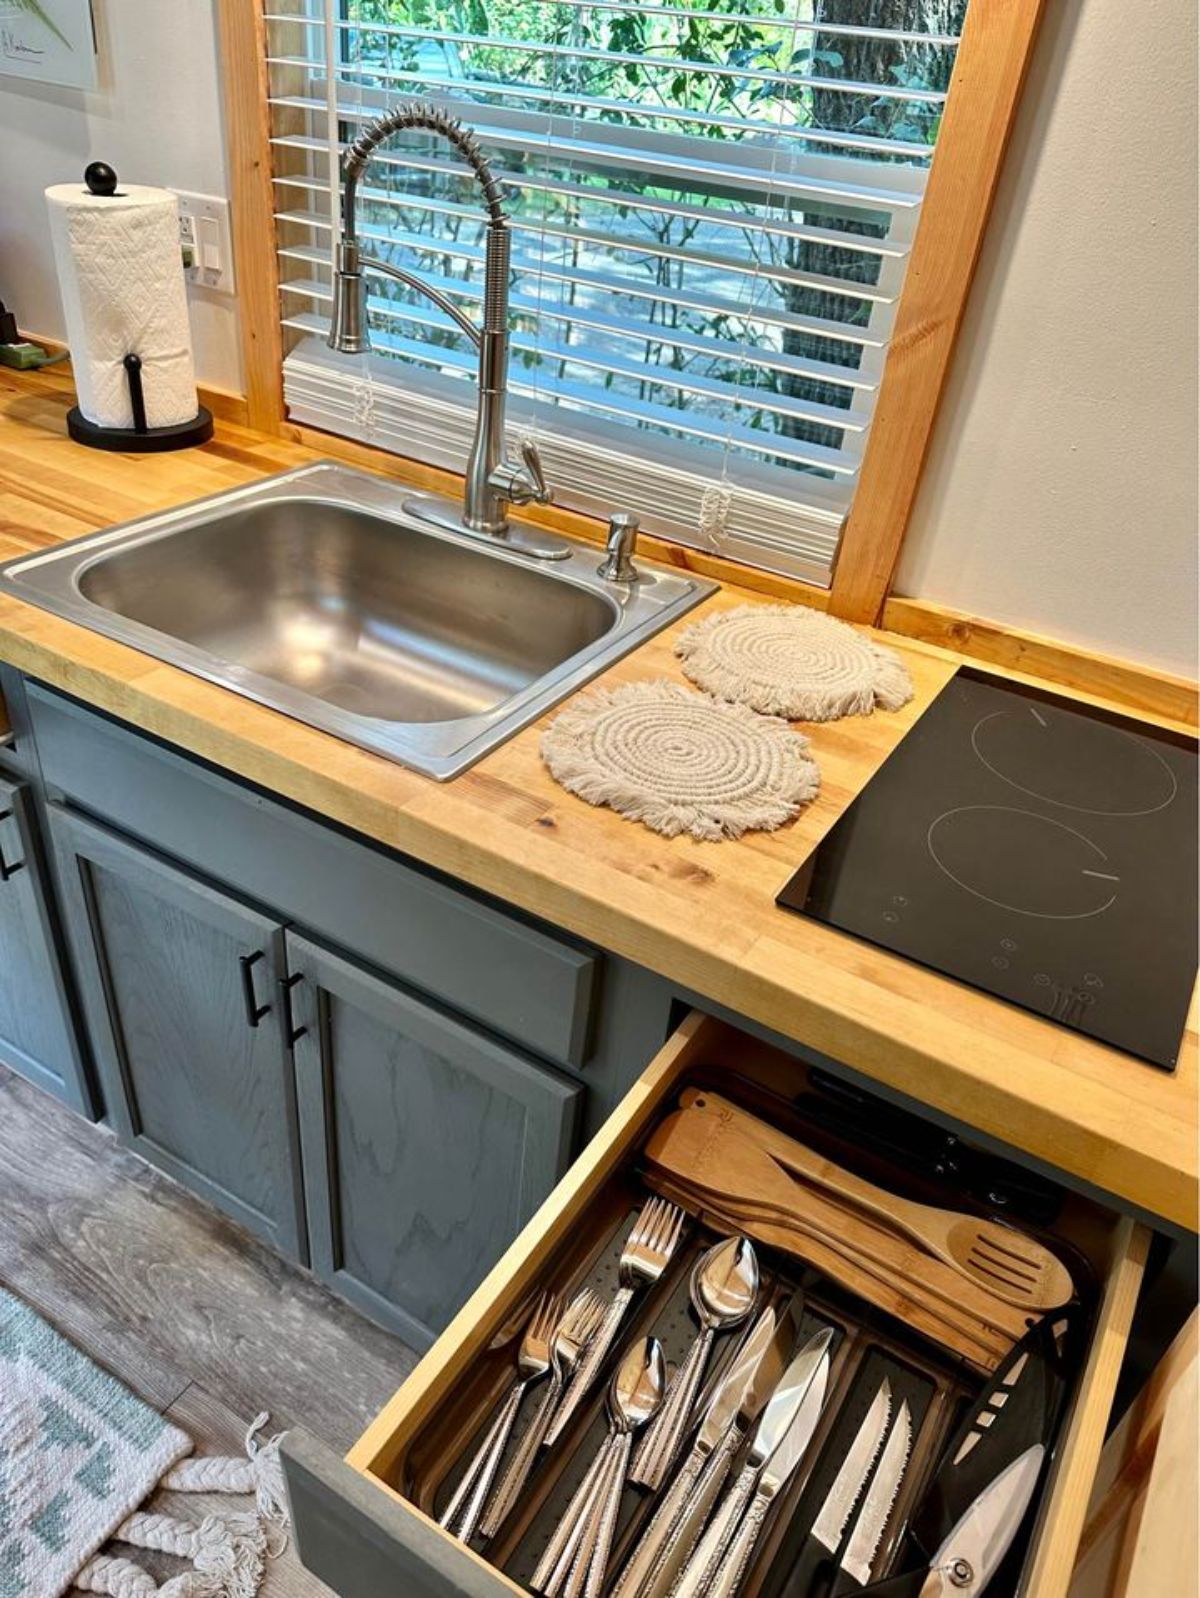 Stainless steel sink, stove and storage cabinets in the kitchen area of 20’ turnkey ready tiny house